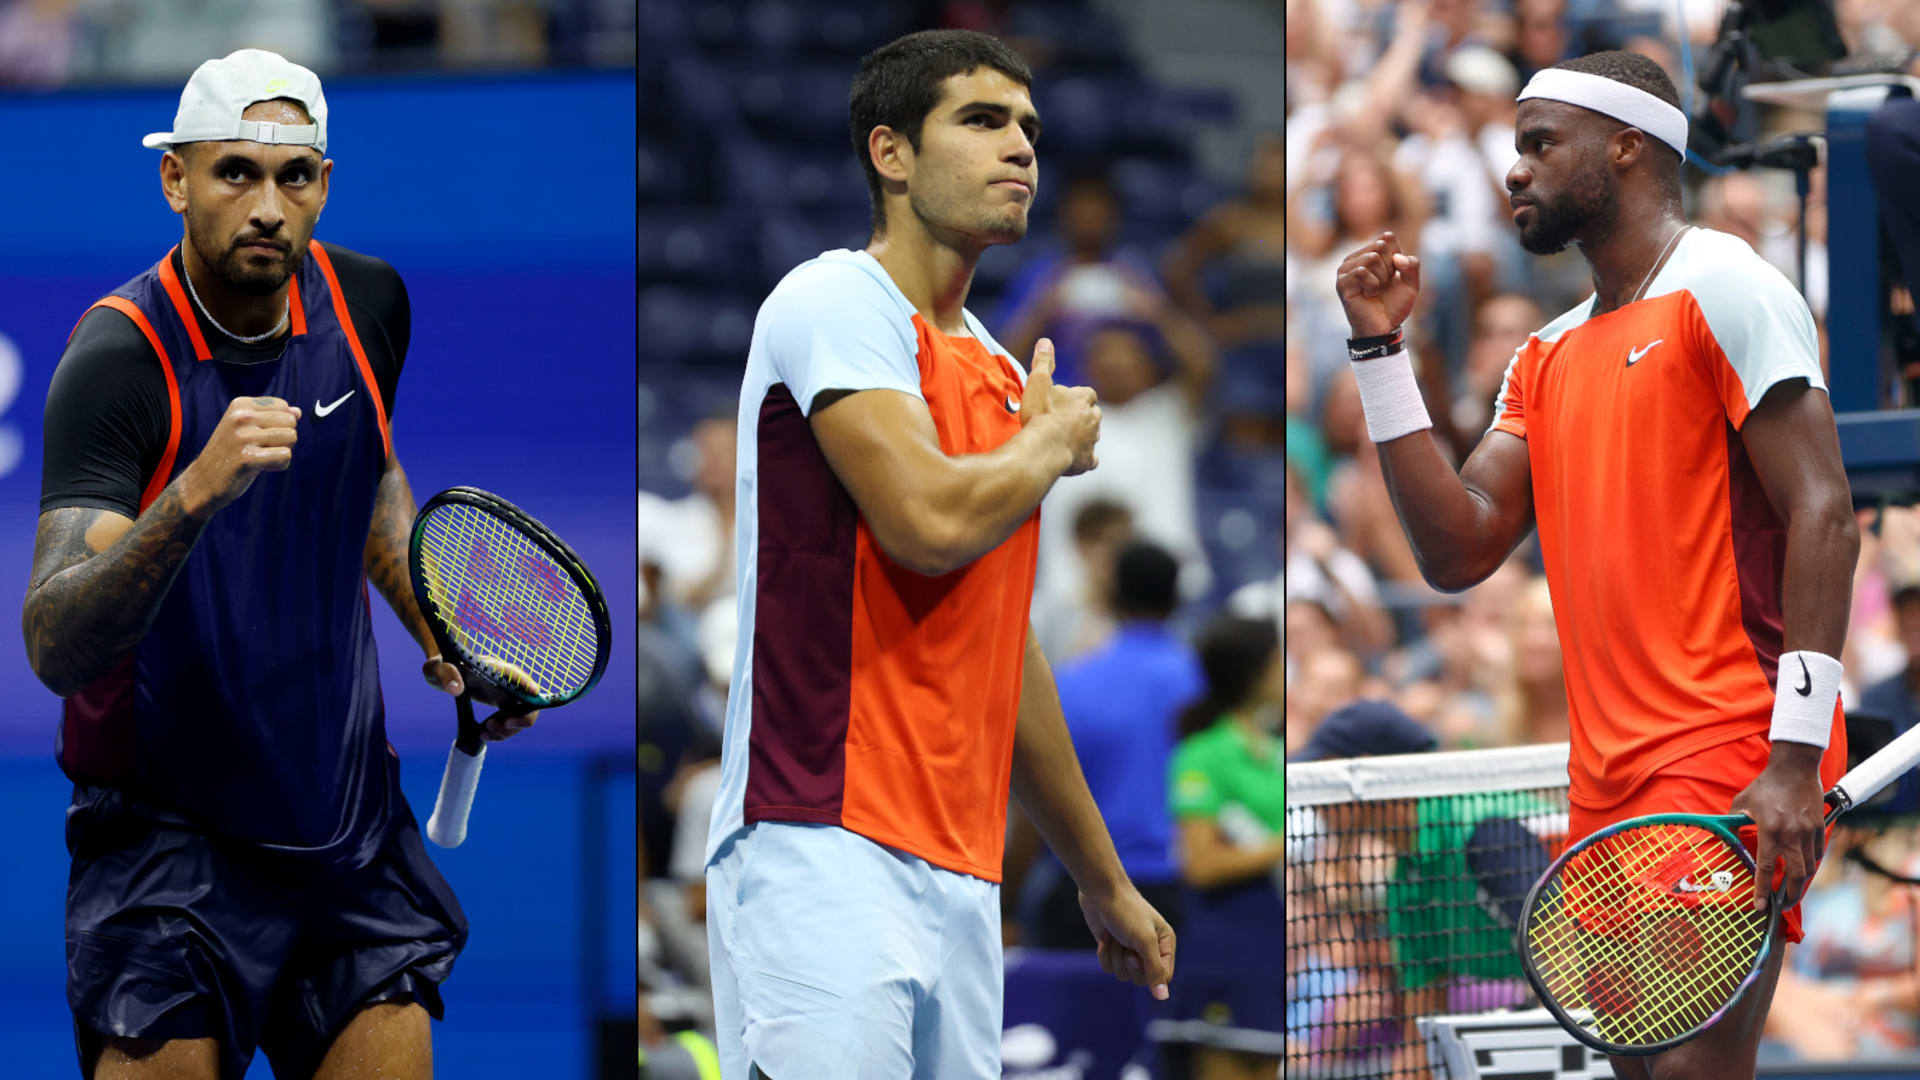 Nick Kyrgios, Carlos Alcaraz and Frances Tiafoe have brought a needed, crowd-pleasing explosiveness to this years US Open